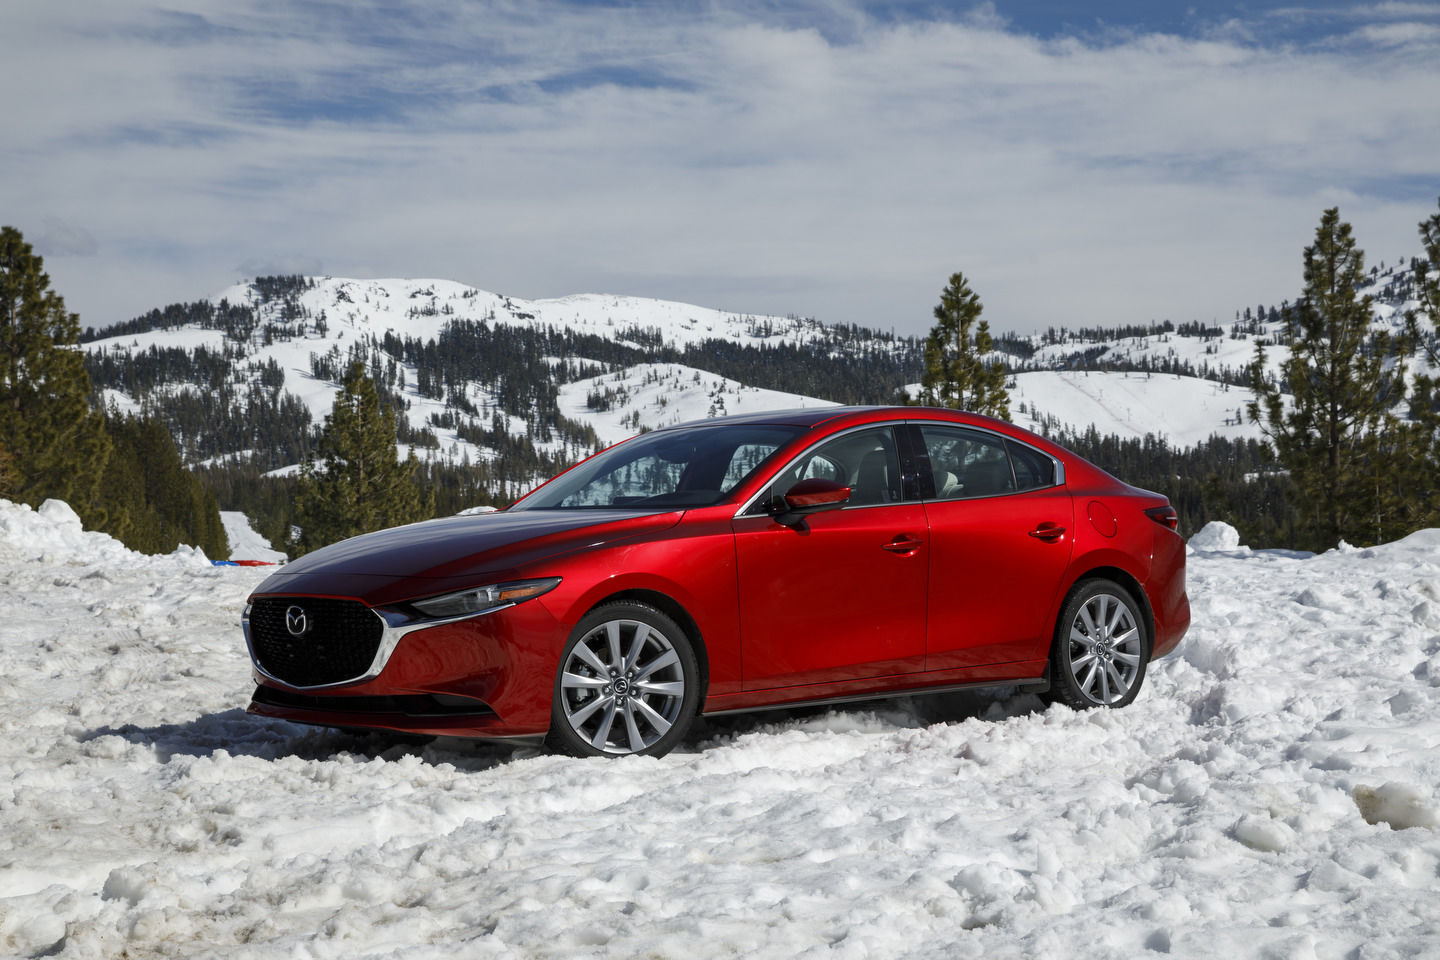 Tips to Keep Your Mazda Looking Brand New This Winter